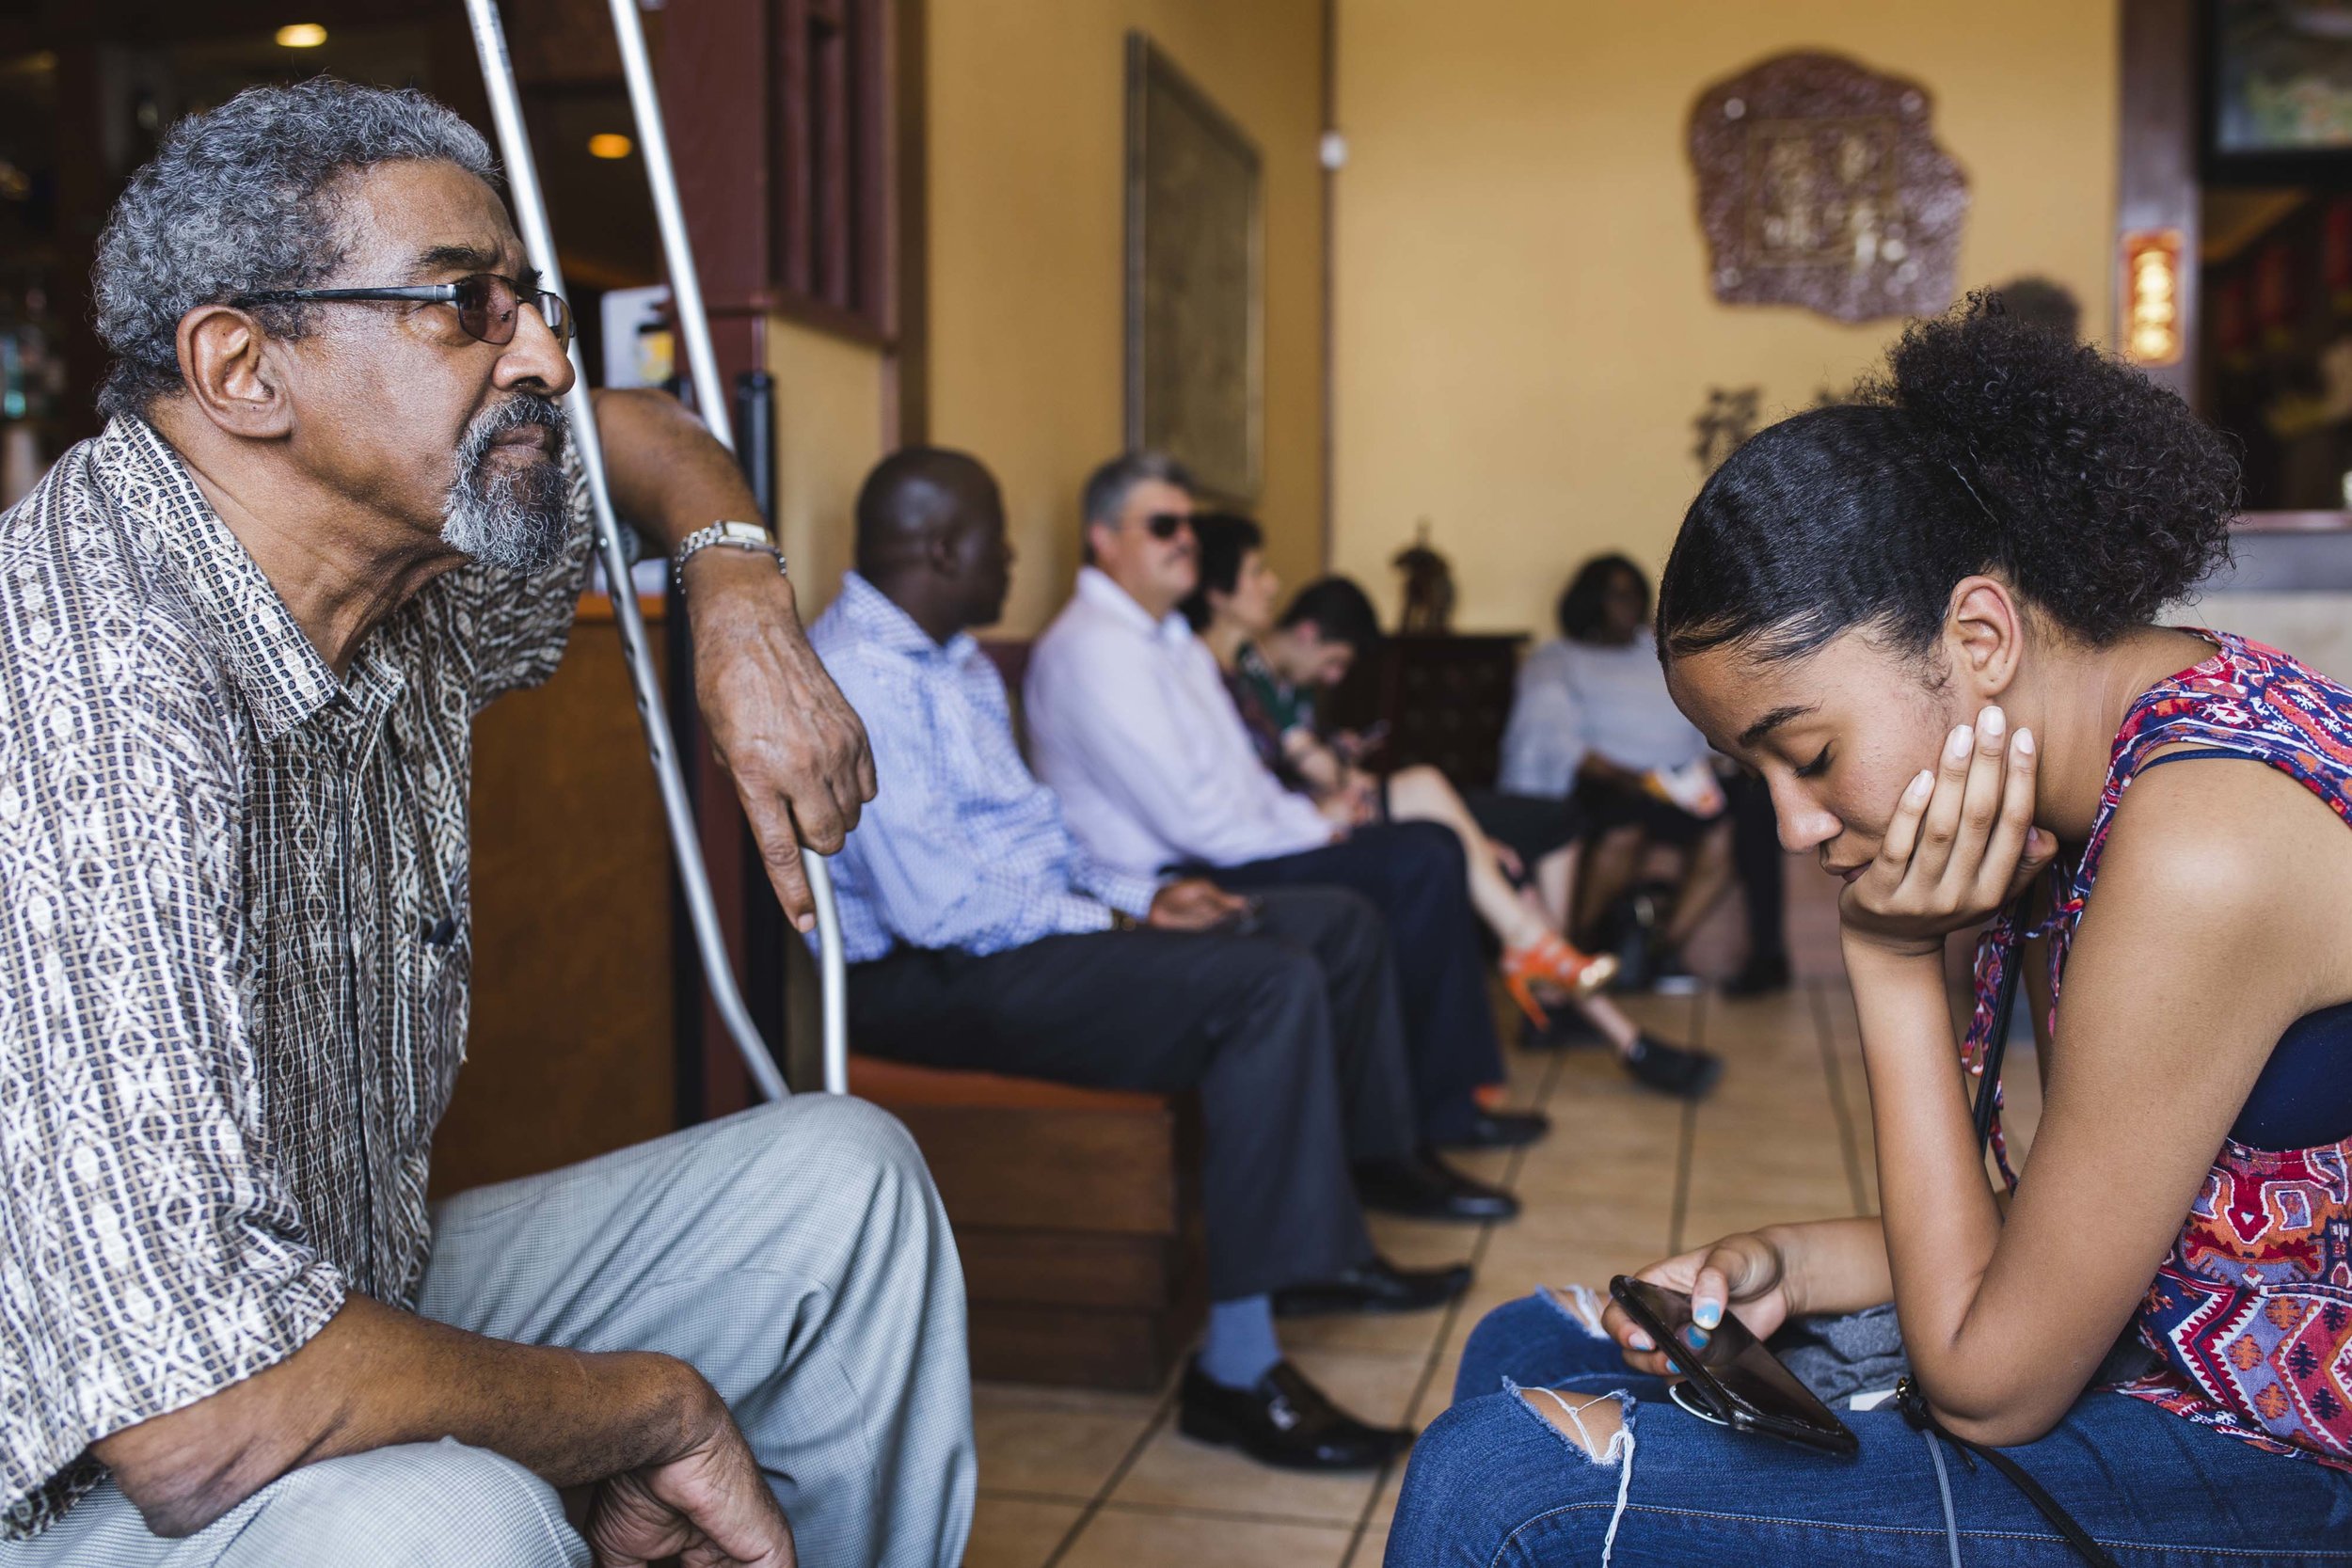  On Father’s Day, Carlton Brown, 72, waits for a table while his 13-year-old daughter has her eyes glued to her phone. “It is challenging to keep up with technology and the changing system,” said Brown. Often, he feels like he is “on the outside look